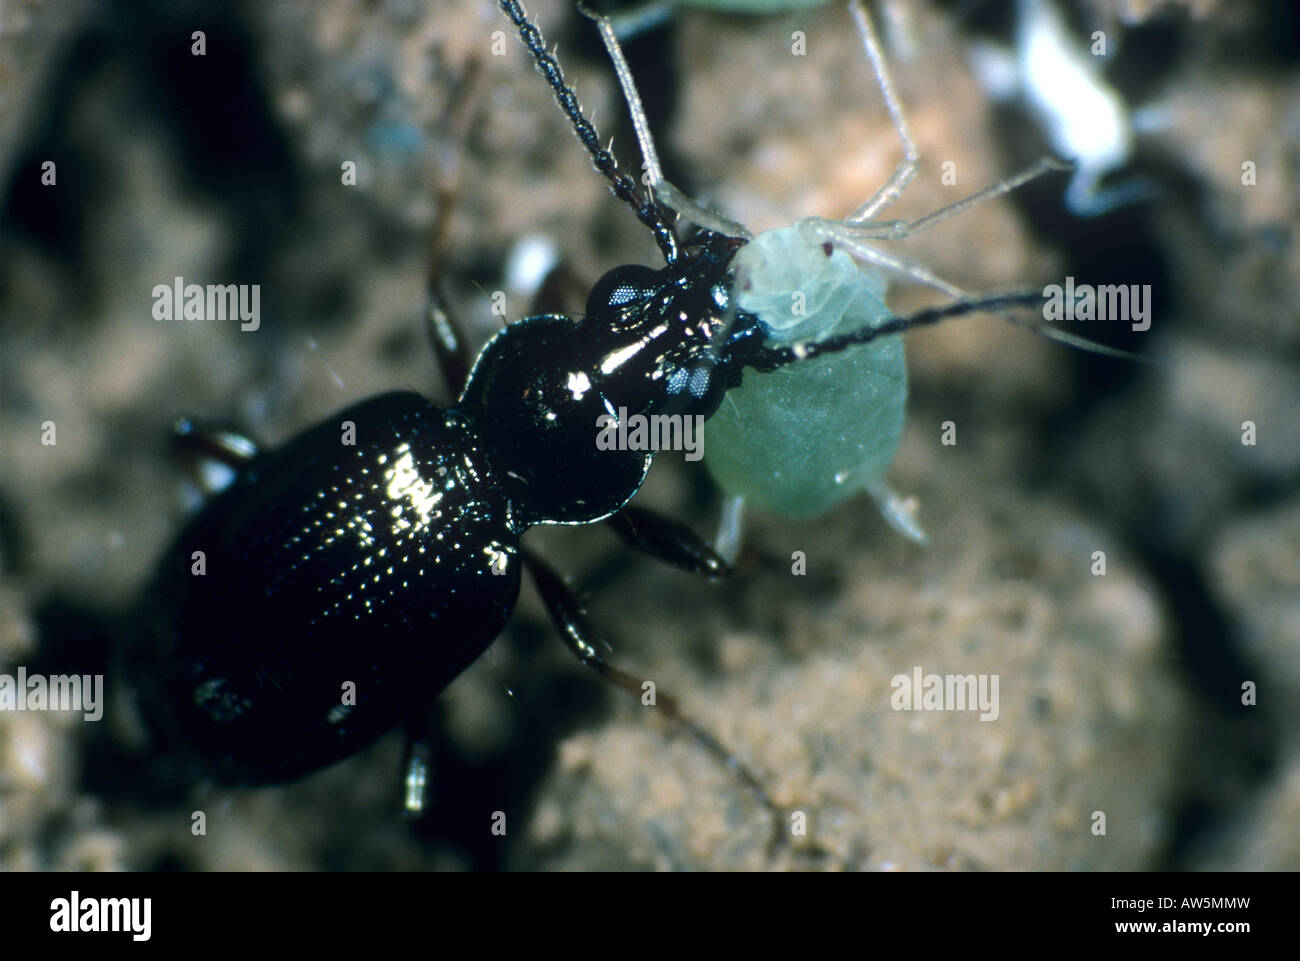 Predatory ground beetle Bembidion obtusum with aphid prey in its mandibles Stock Photo